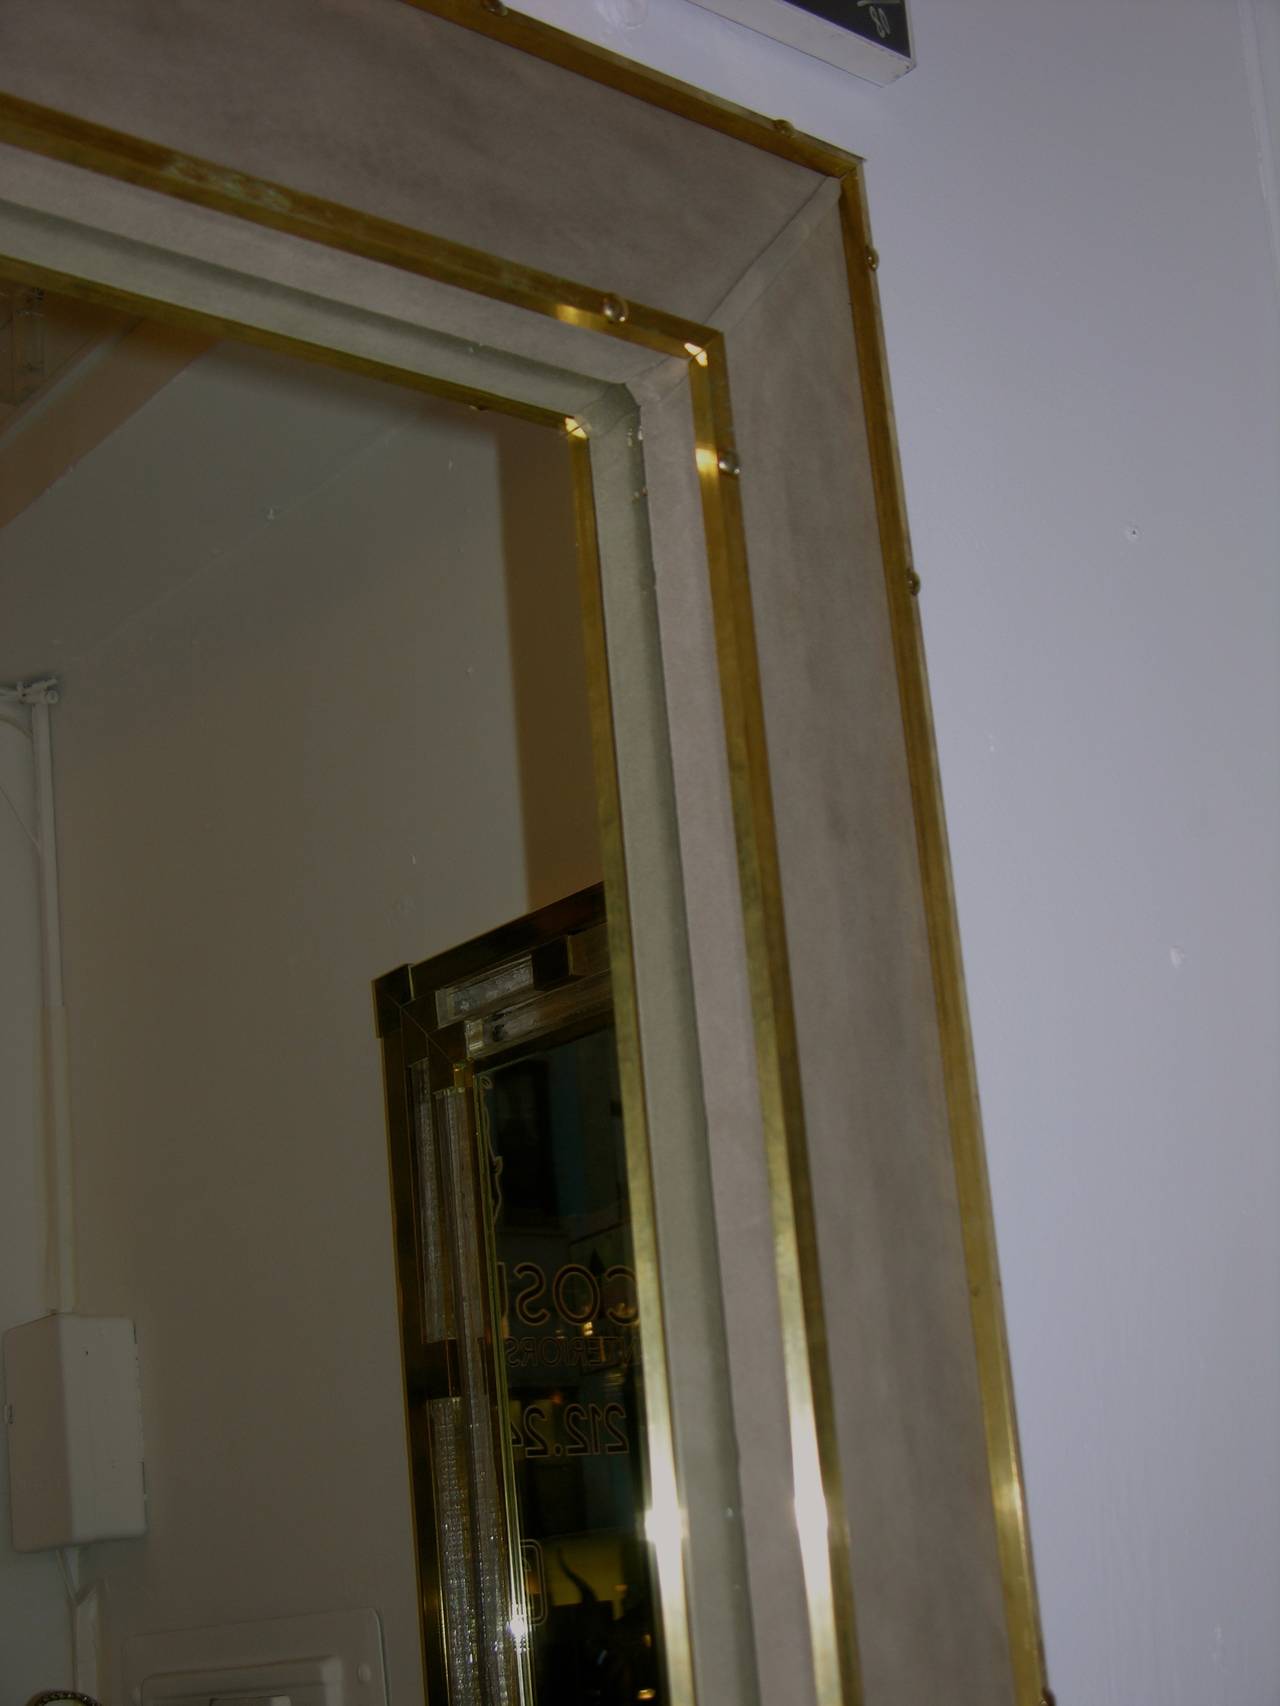 Late 20th Century One-of-a-Kind Italian Suede Floor Mirror with Bronze Accents, 1970